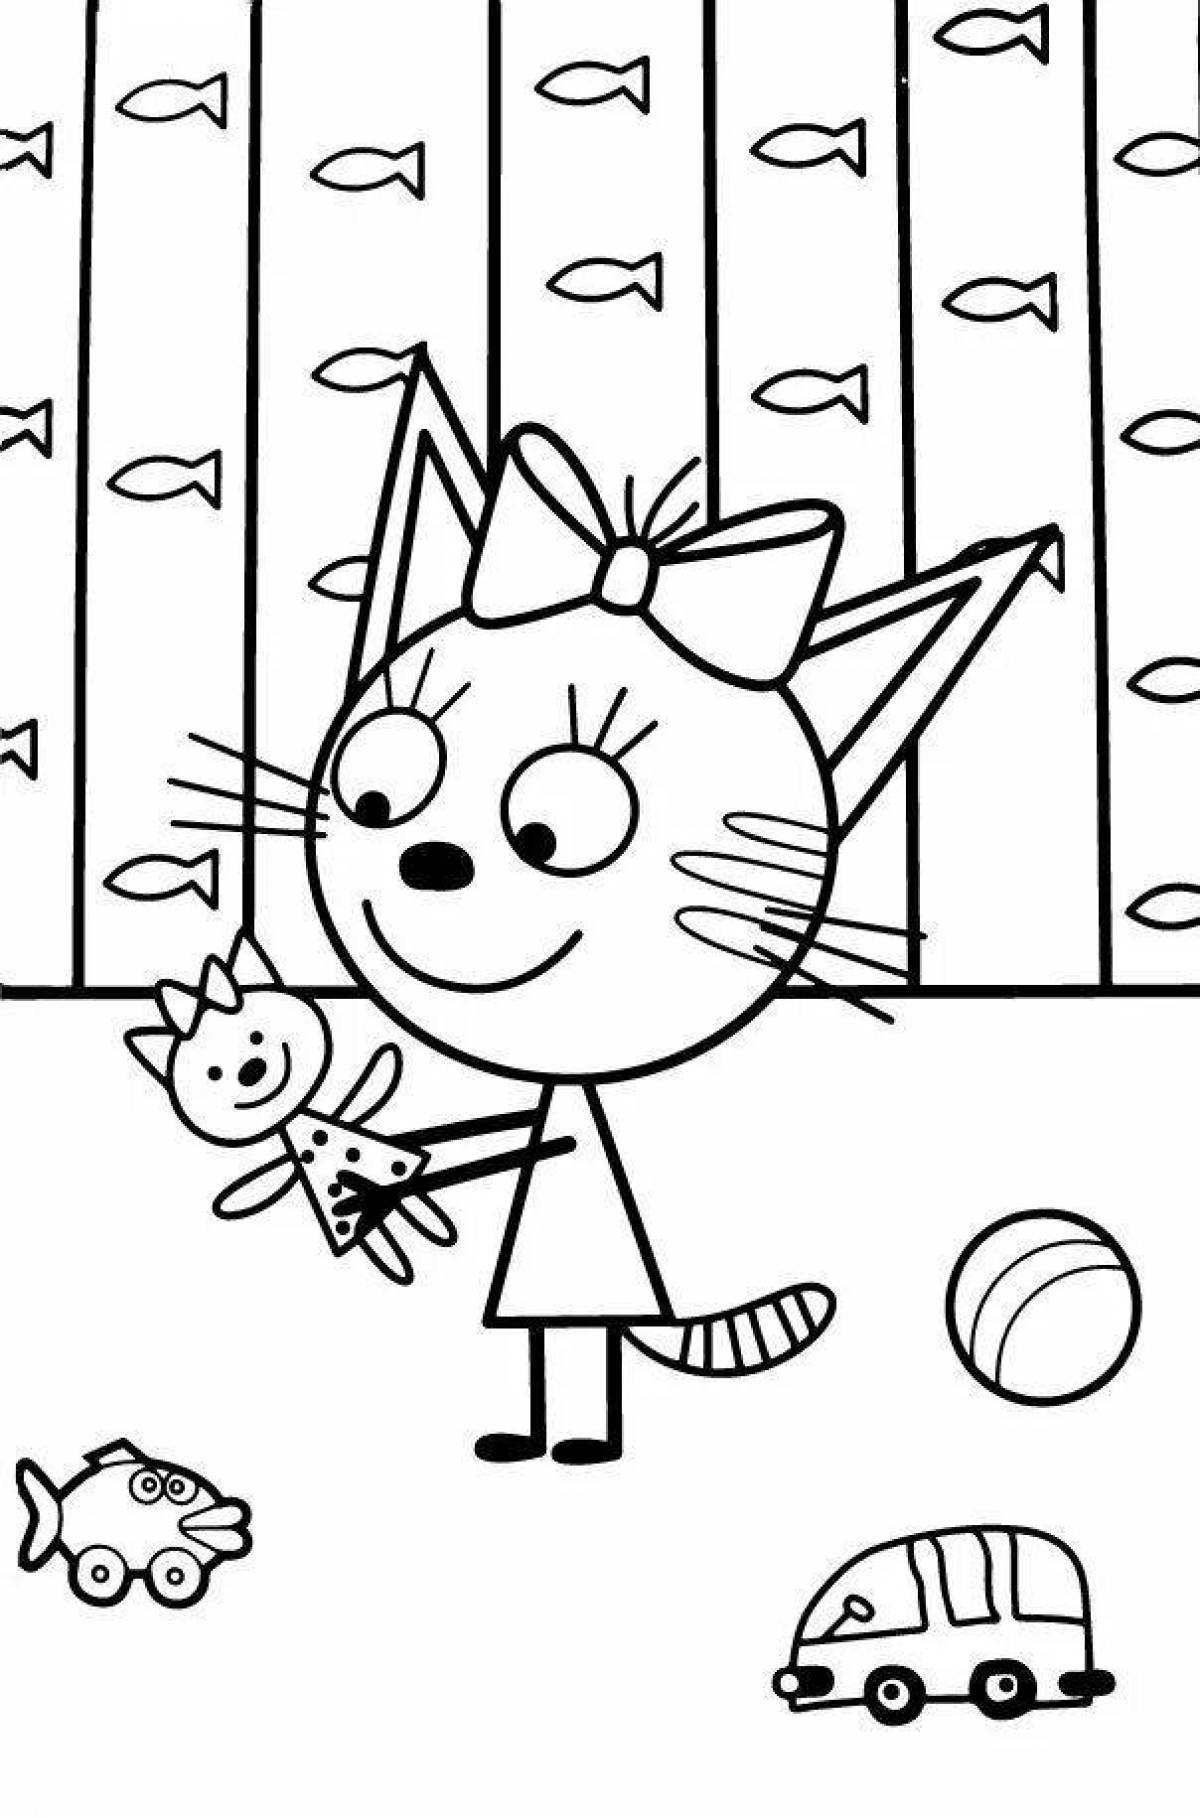 3 cats furry coloring game